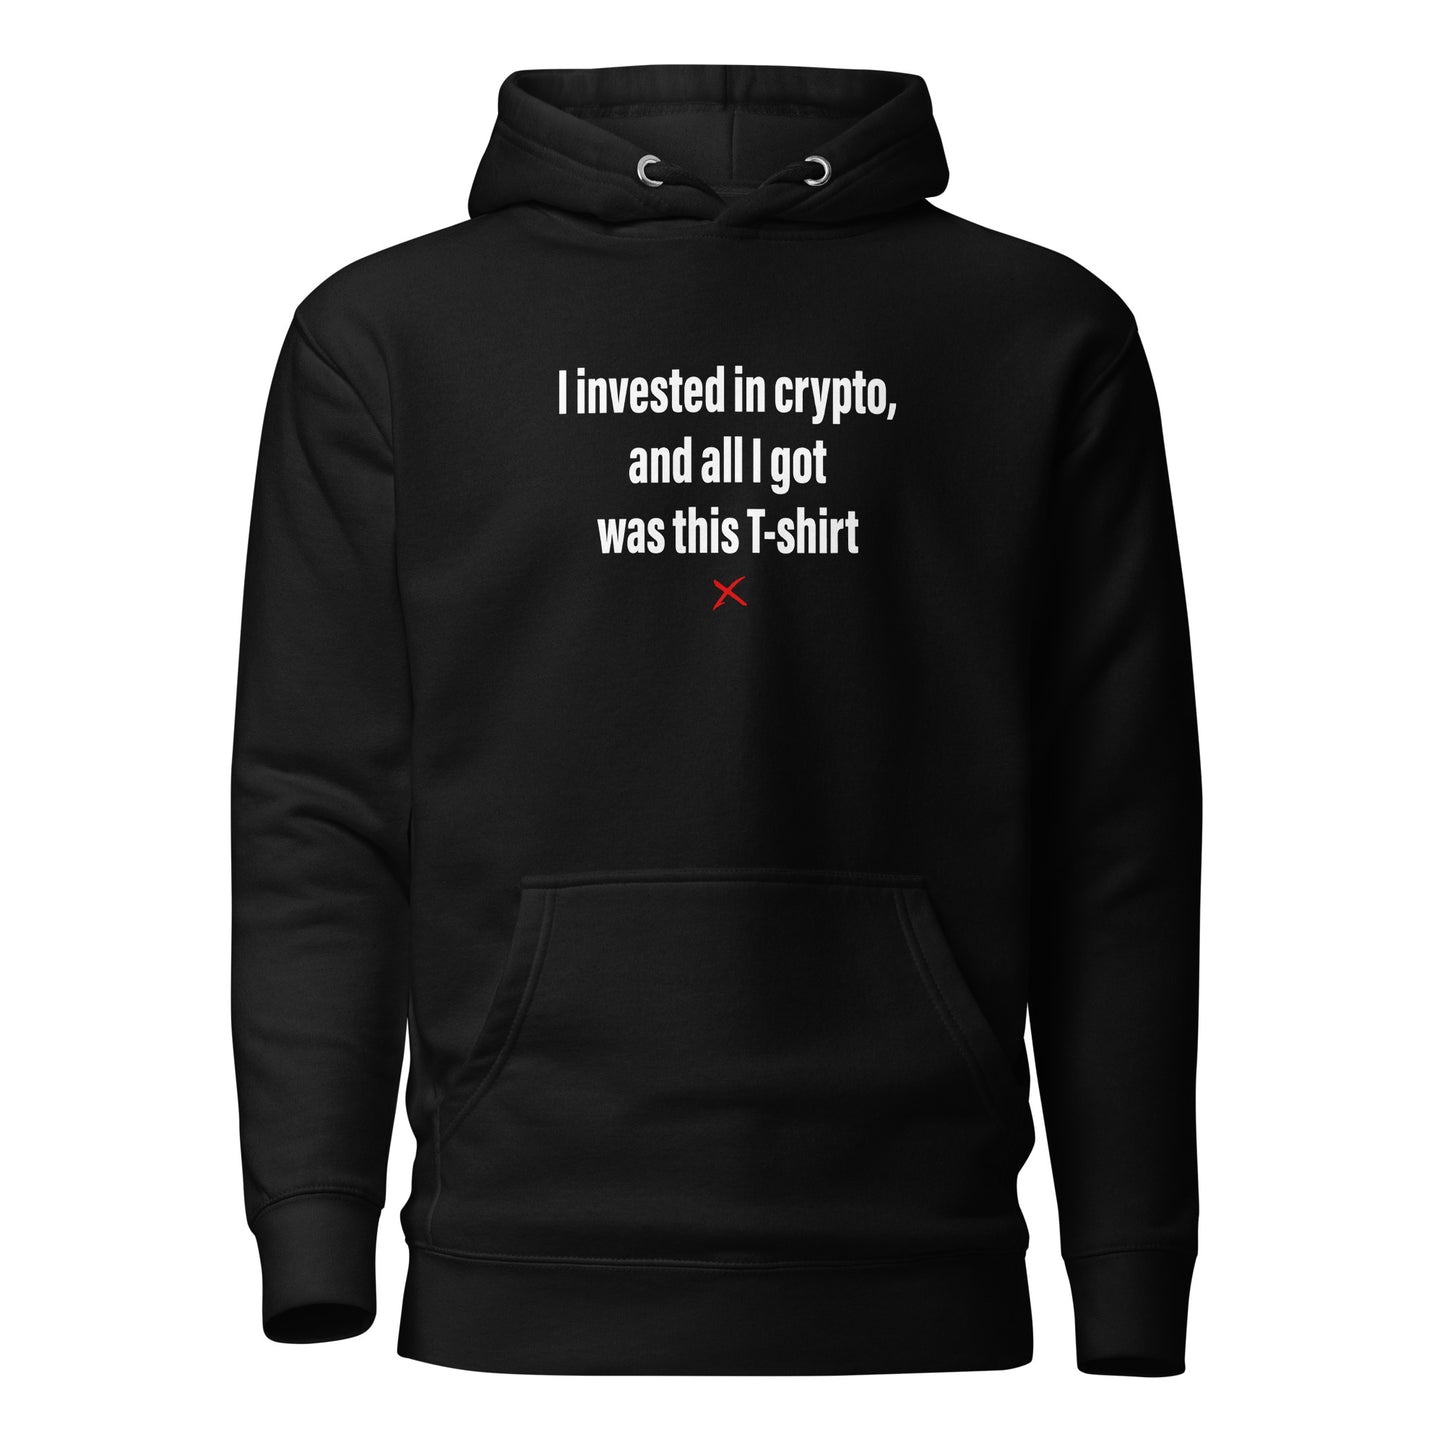 I invested in crypto, and all I got was this T-shirt - Hoodie